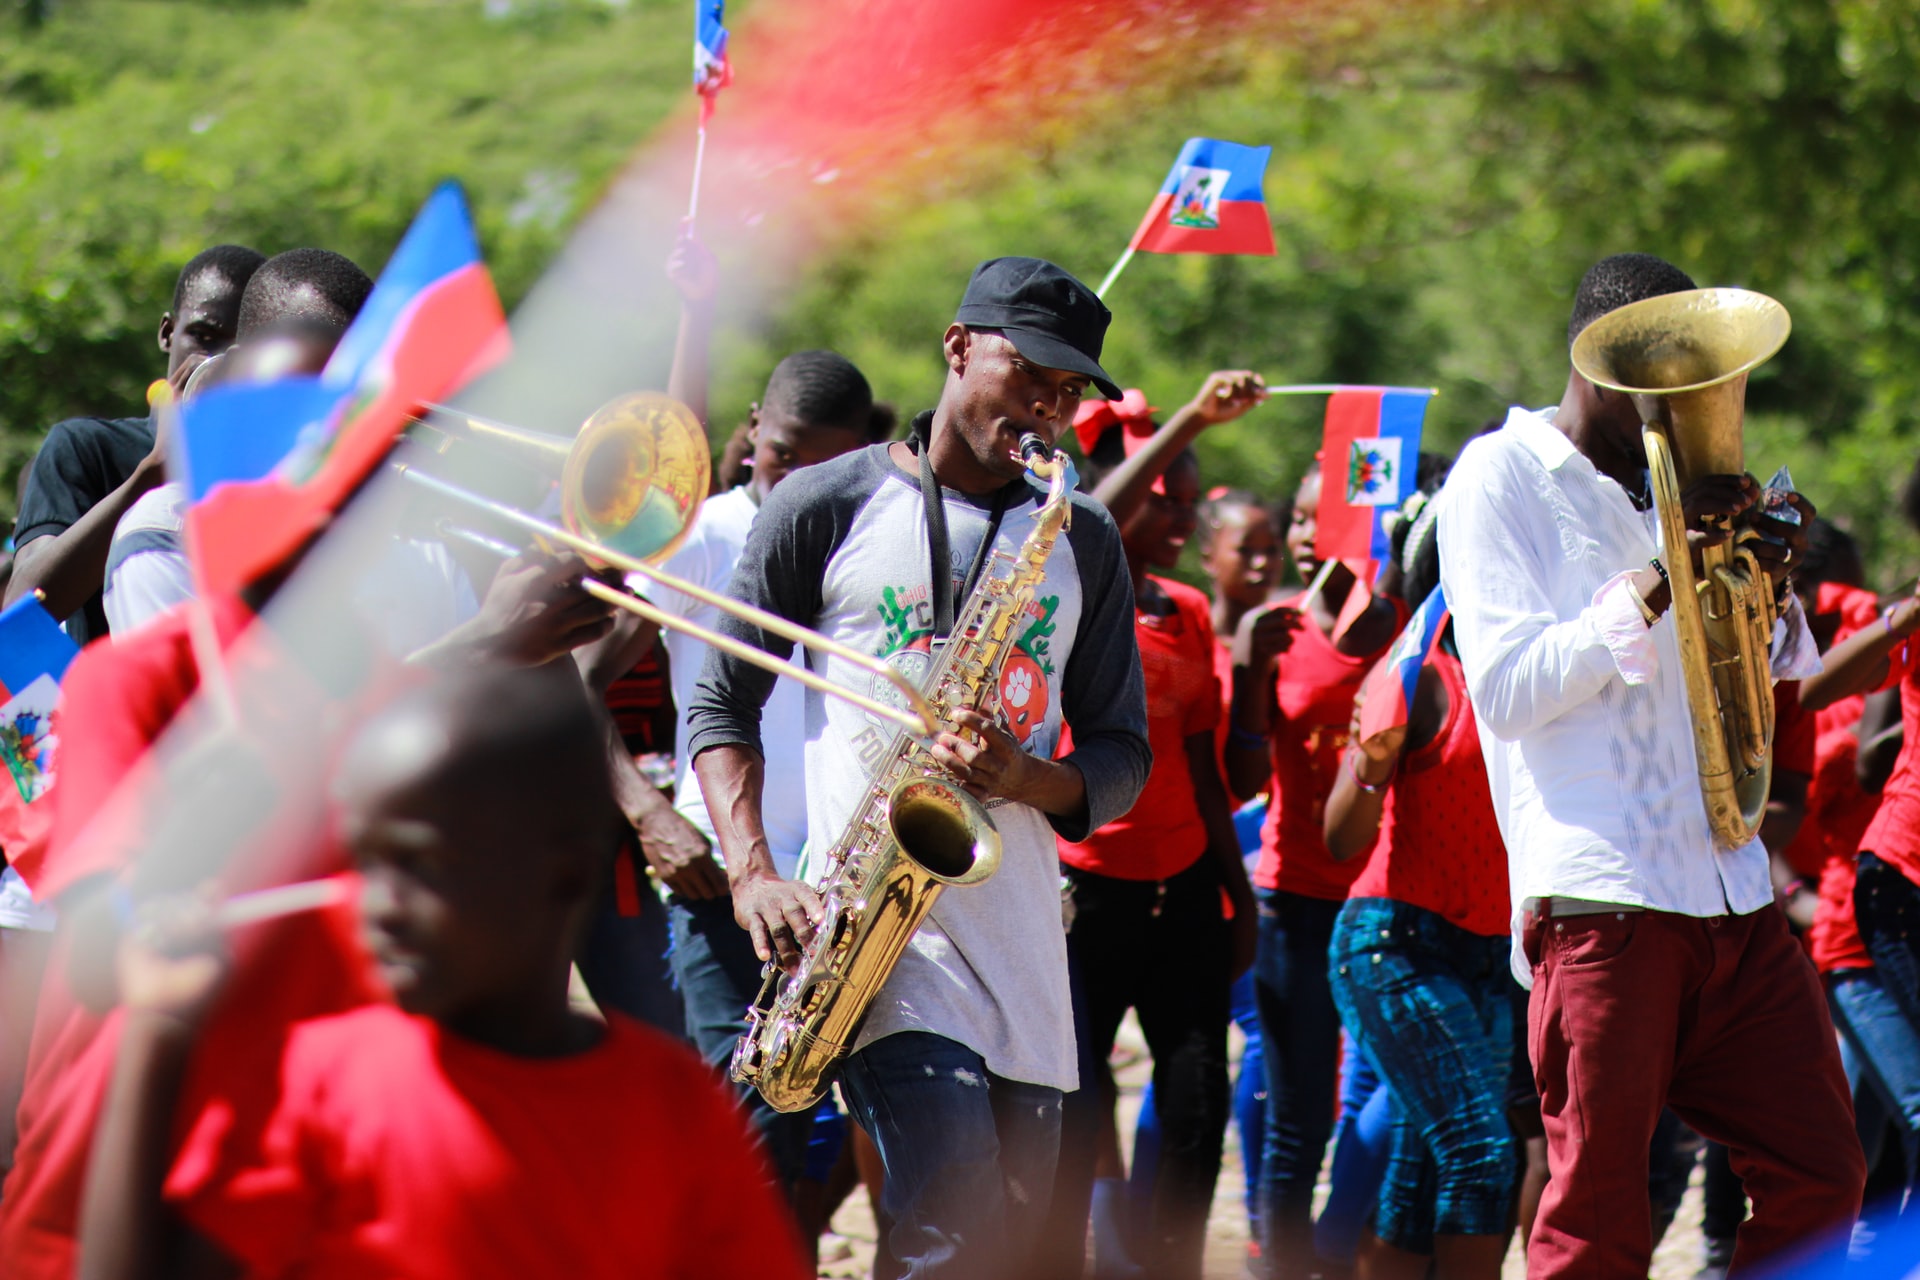 Local Southern Region Braces for a Surge of 60,000 Haitian Migrants